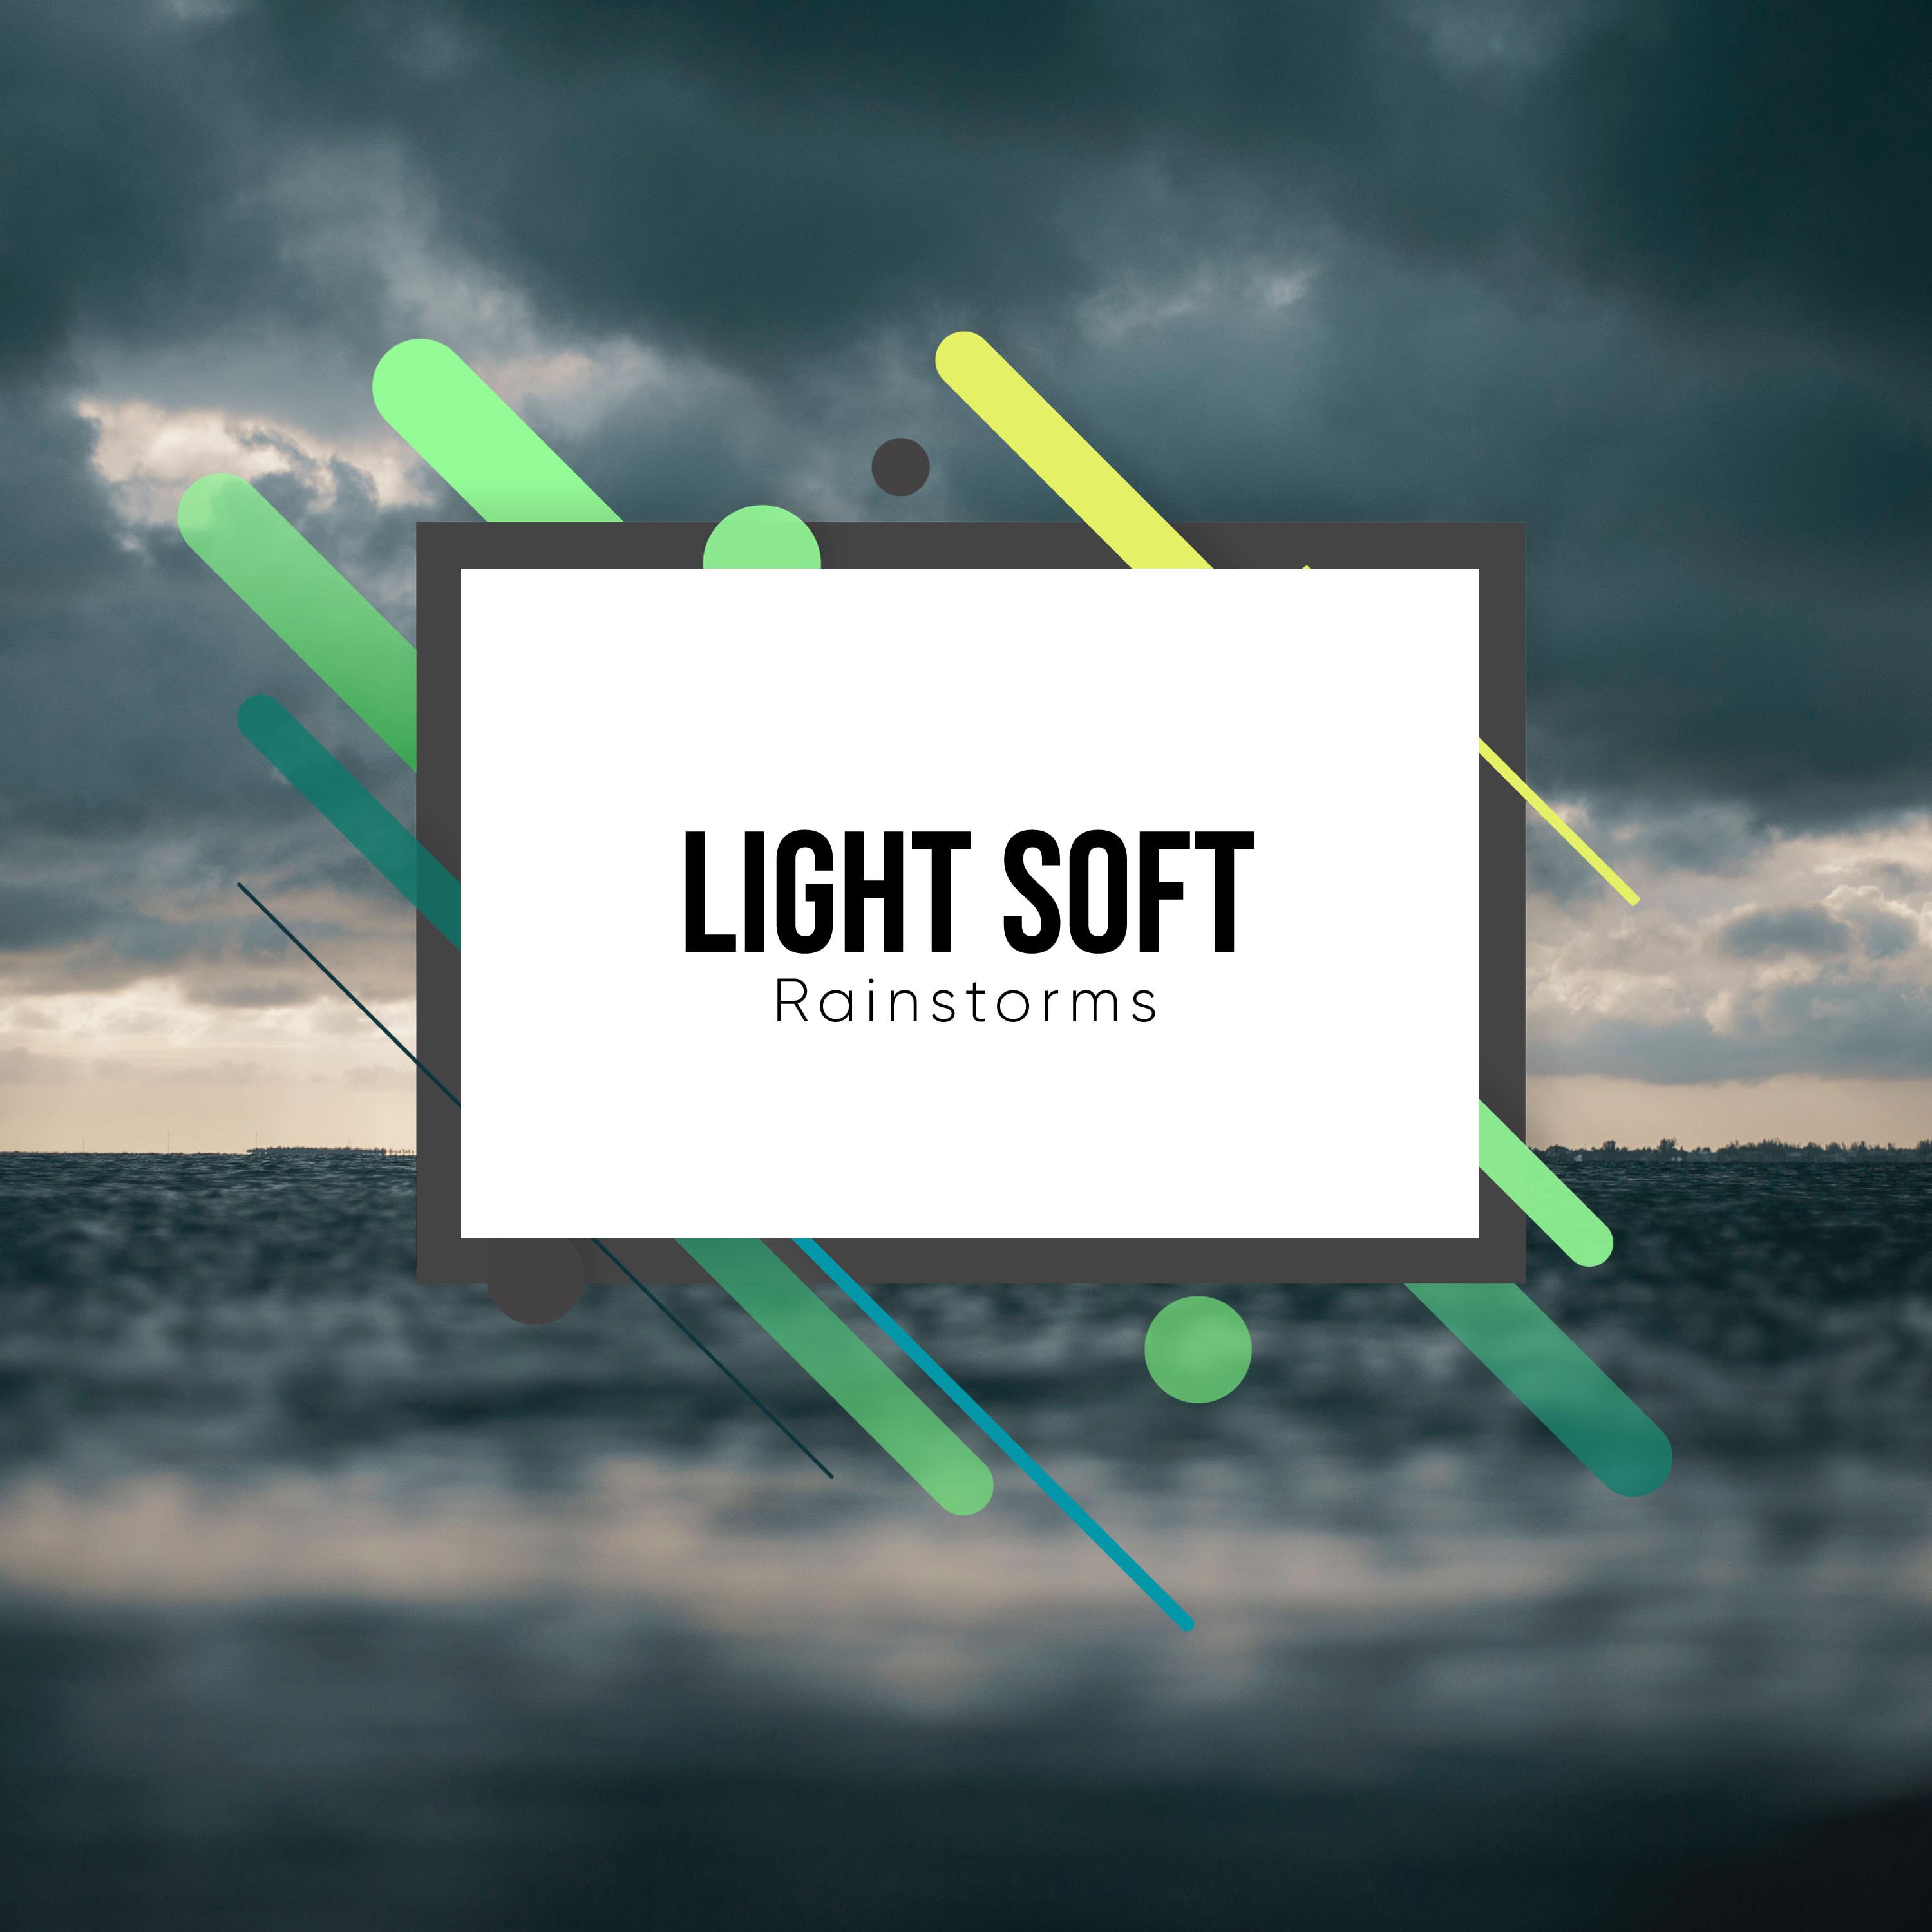 #19 Light Soft Rainstorms for Relaxation and Ambience